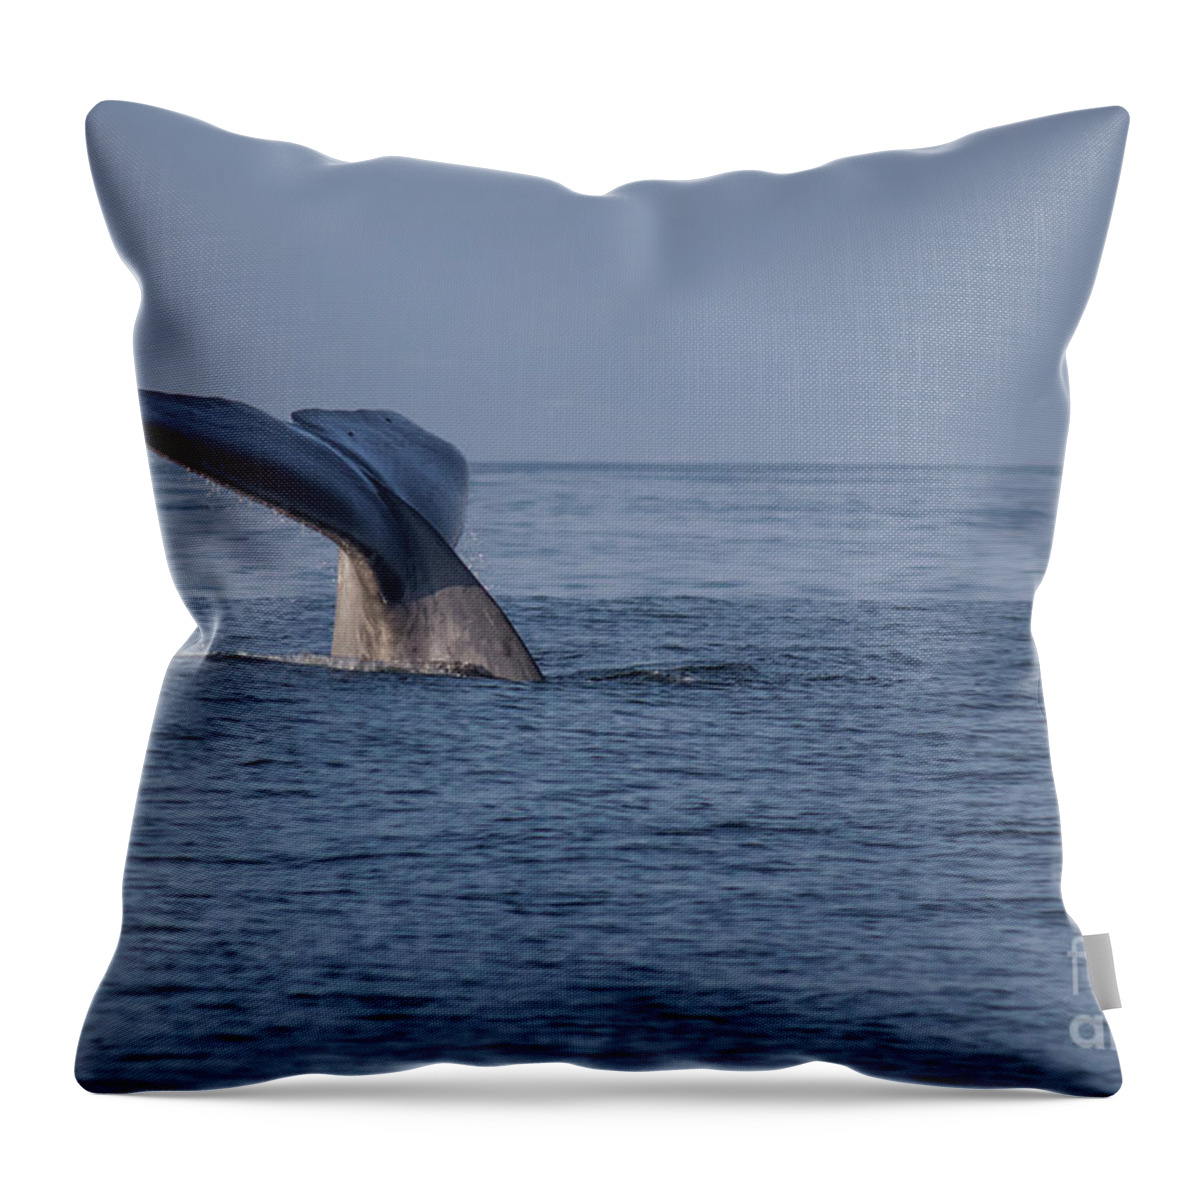 Blue Throw Pillow featuring the photograph Blue Whale Tail by Suzanne Luft